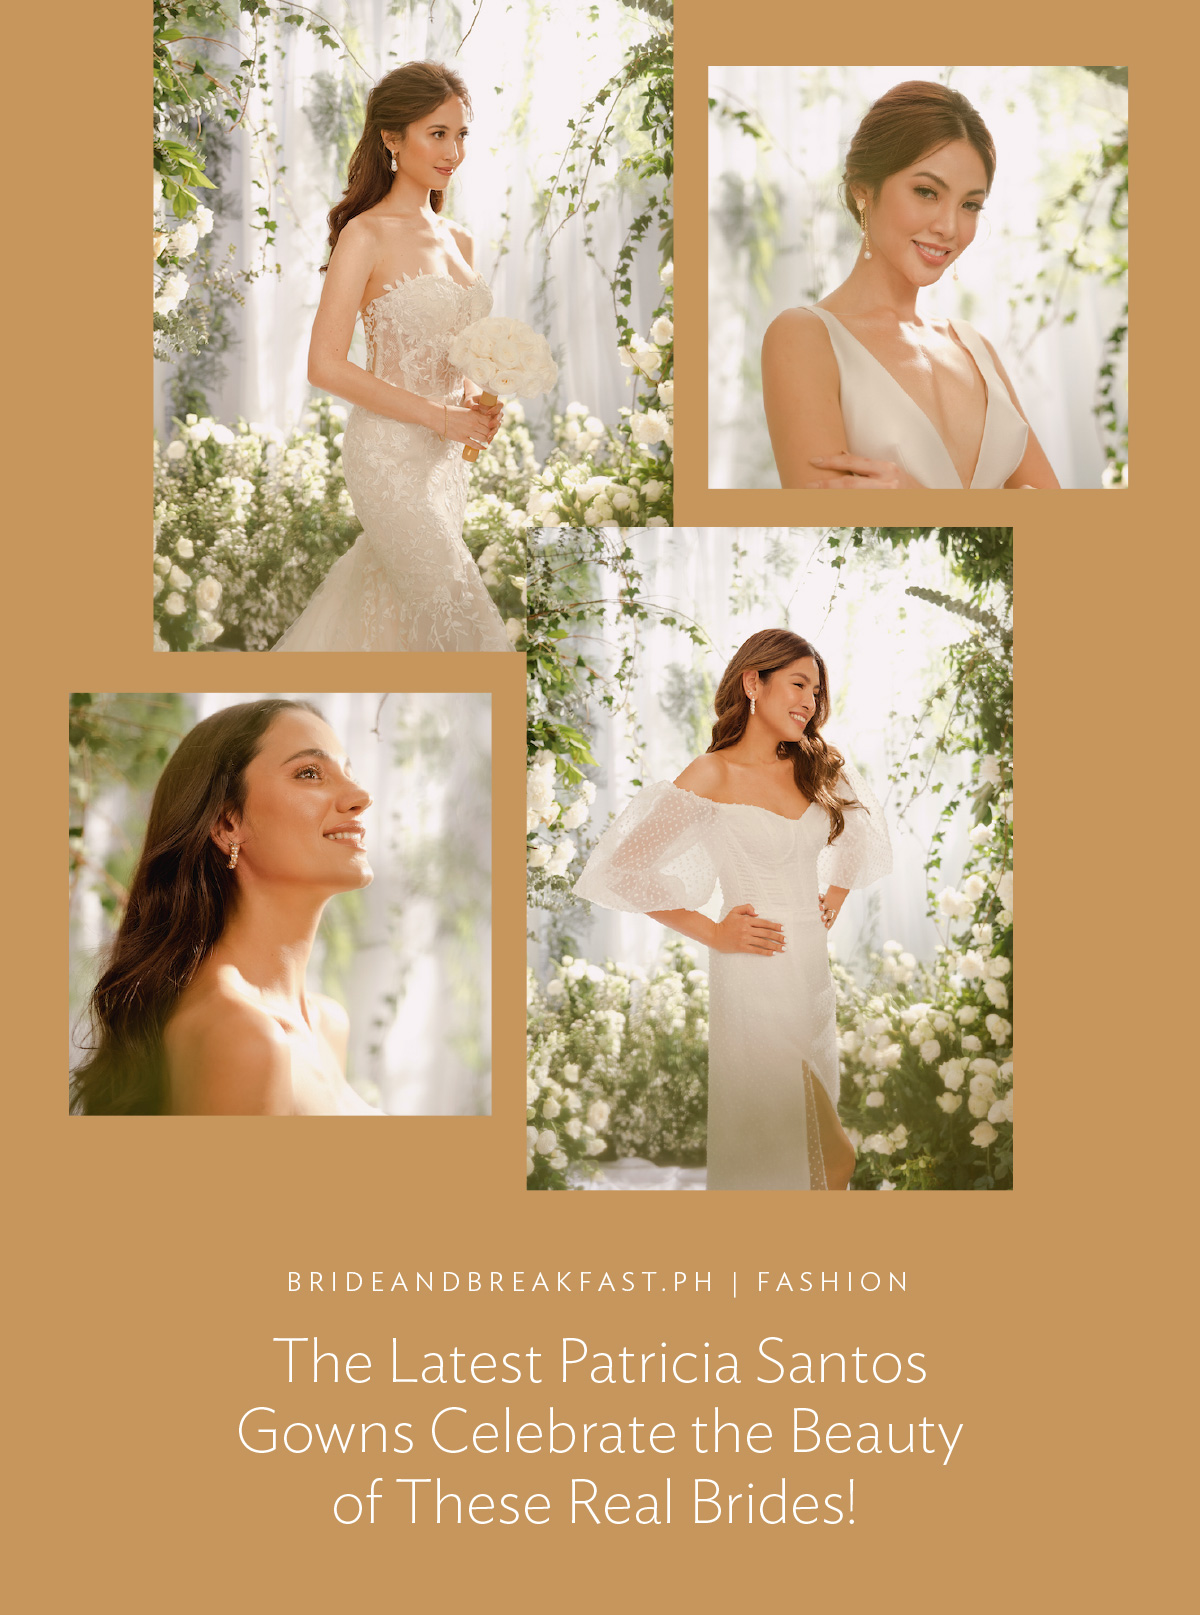 The Latest Patricia Santos Gowns Celebrate the Beauty of These Real Brides!